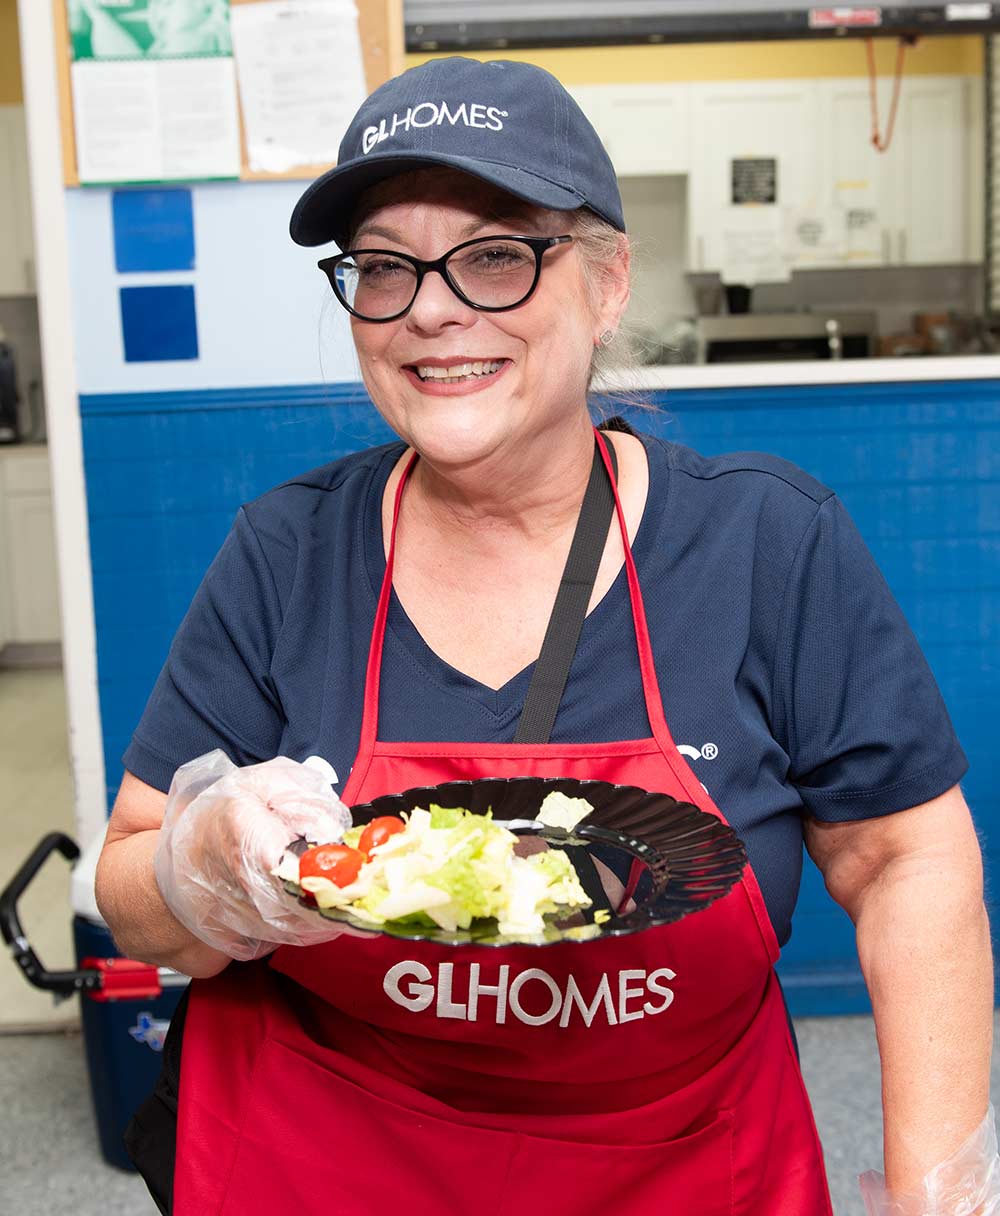 GL Homes employees volunteer to support the Boys & Girls Clubs kitchen staff.